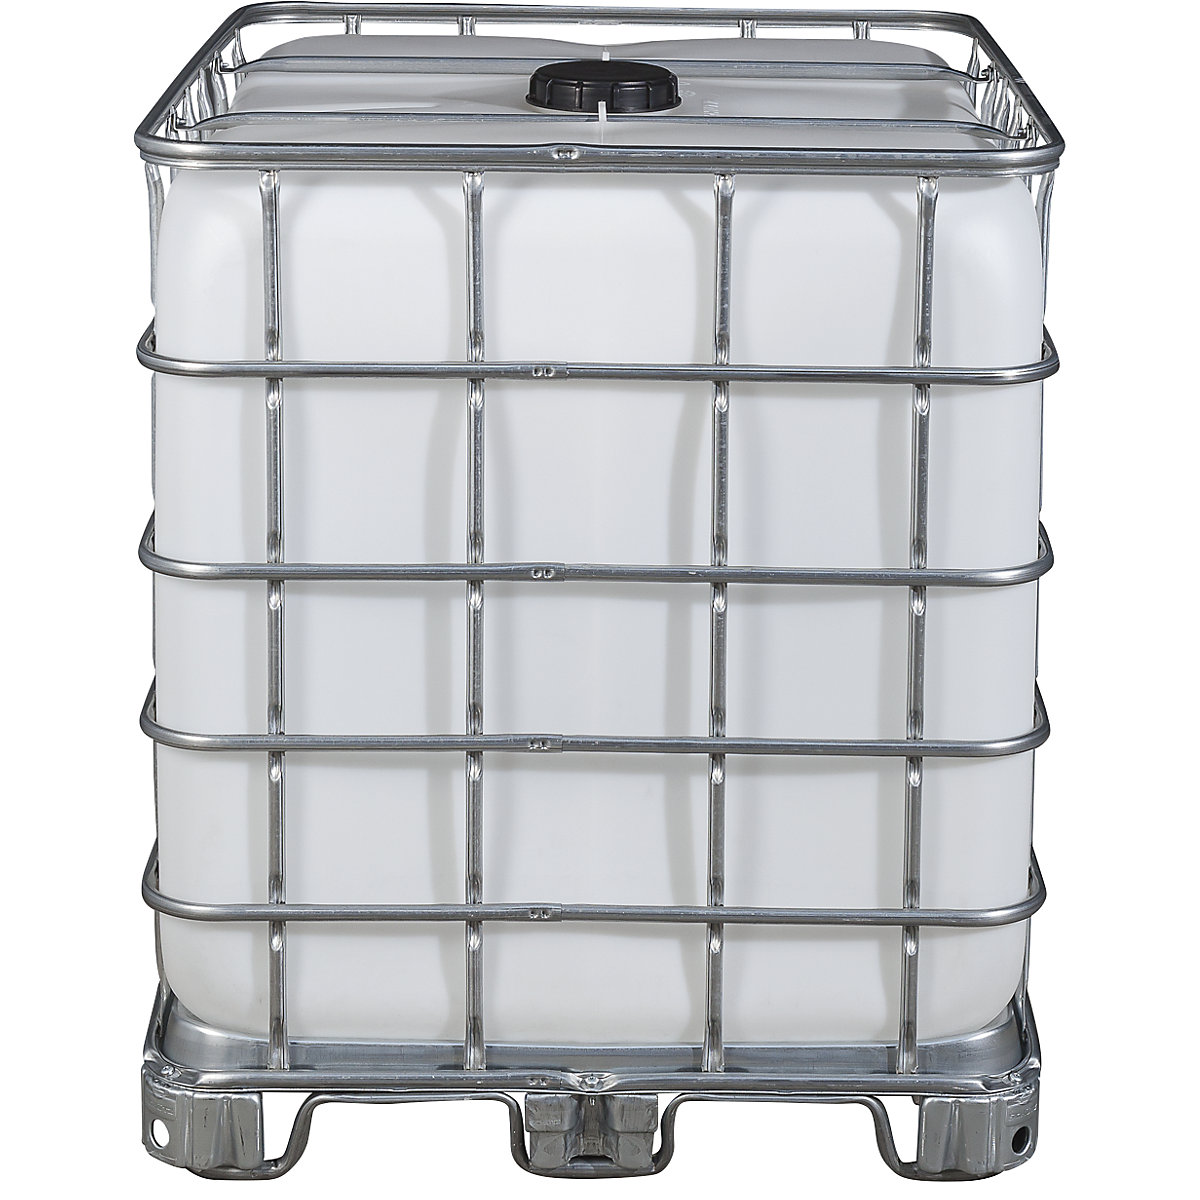 RECOBULK IBC container, UN approval (Product illustration 2)-1